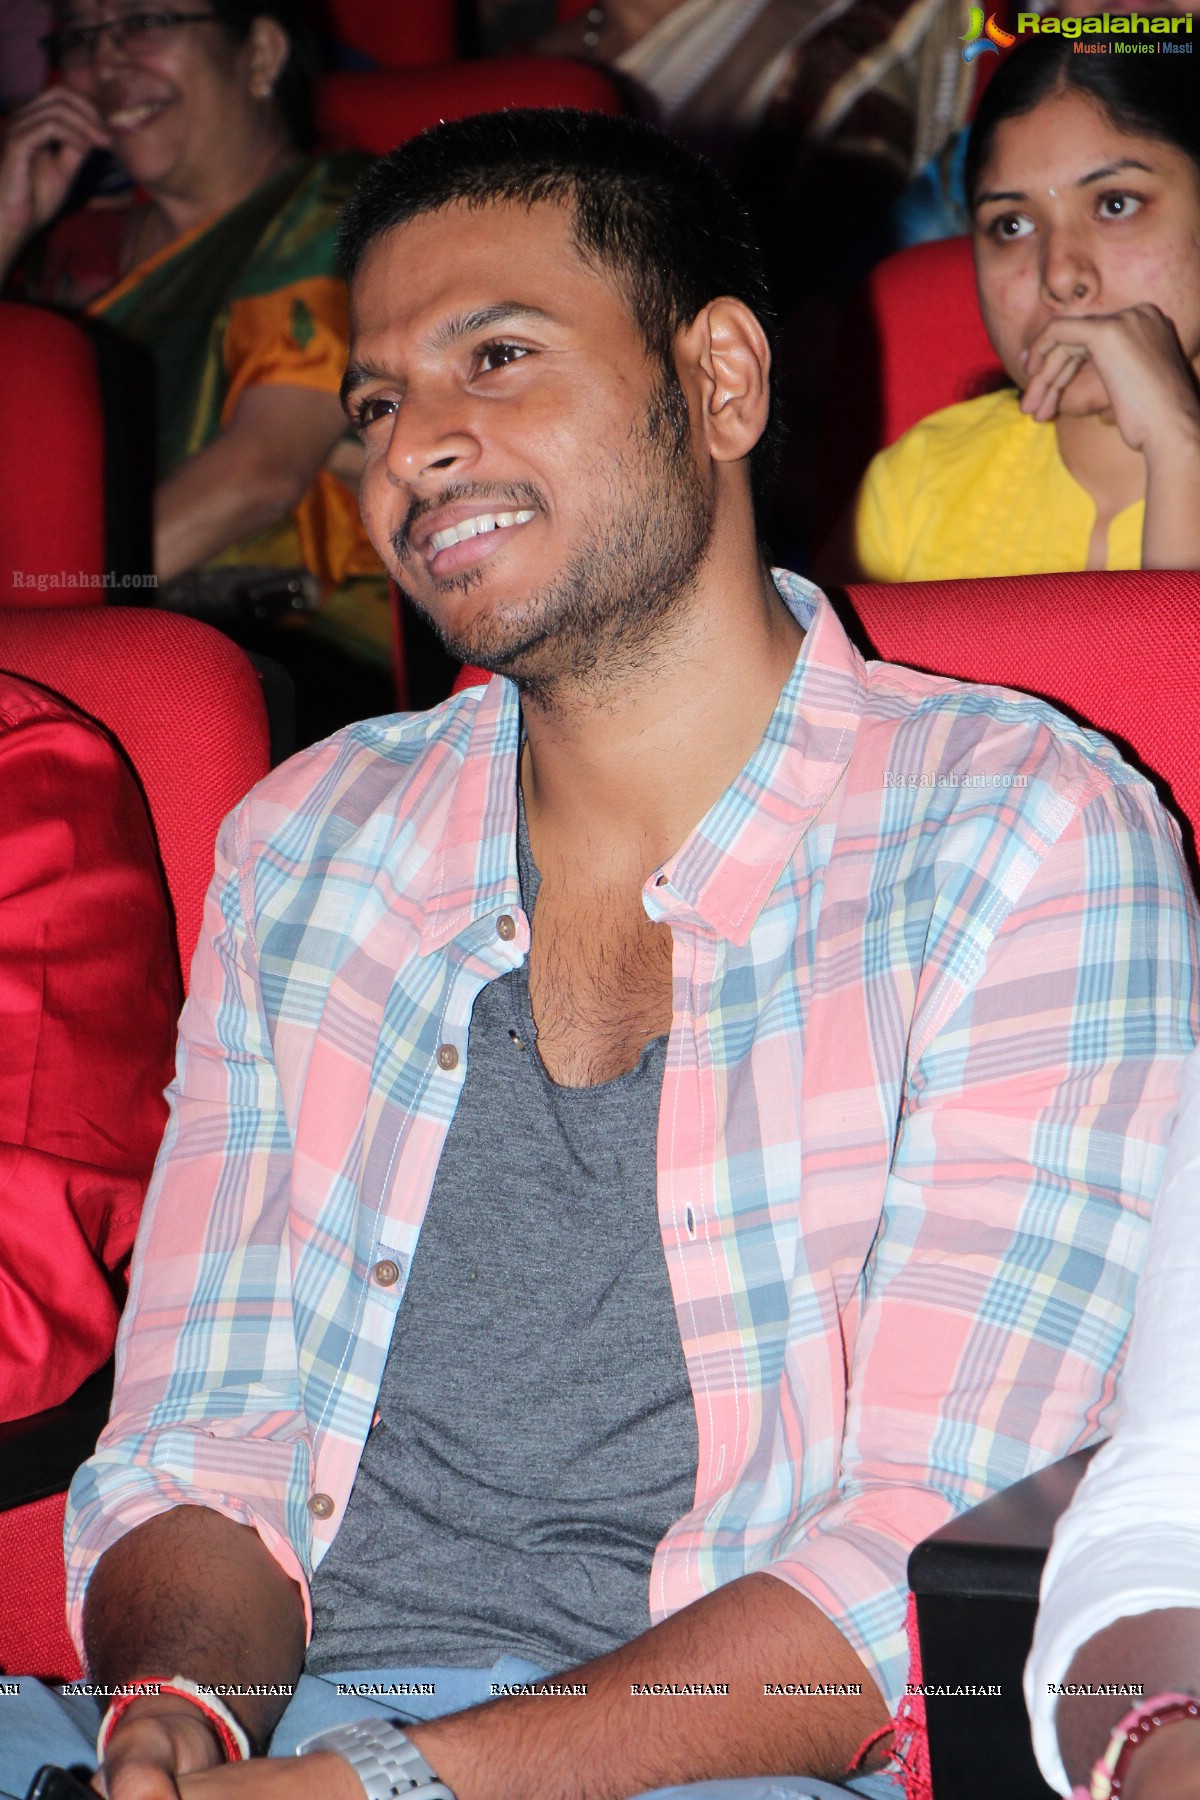 Thaman Music Concert by Kinnera Art Theatres, Hyderabad